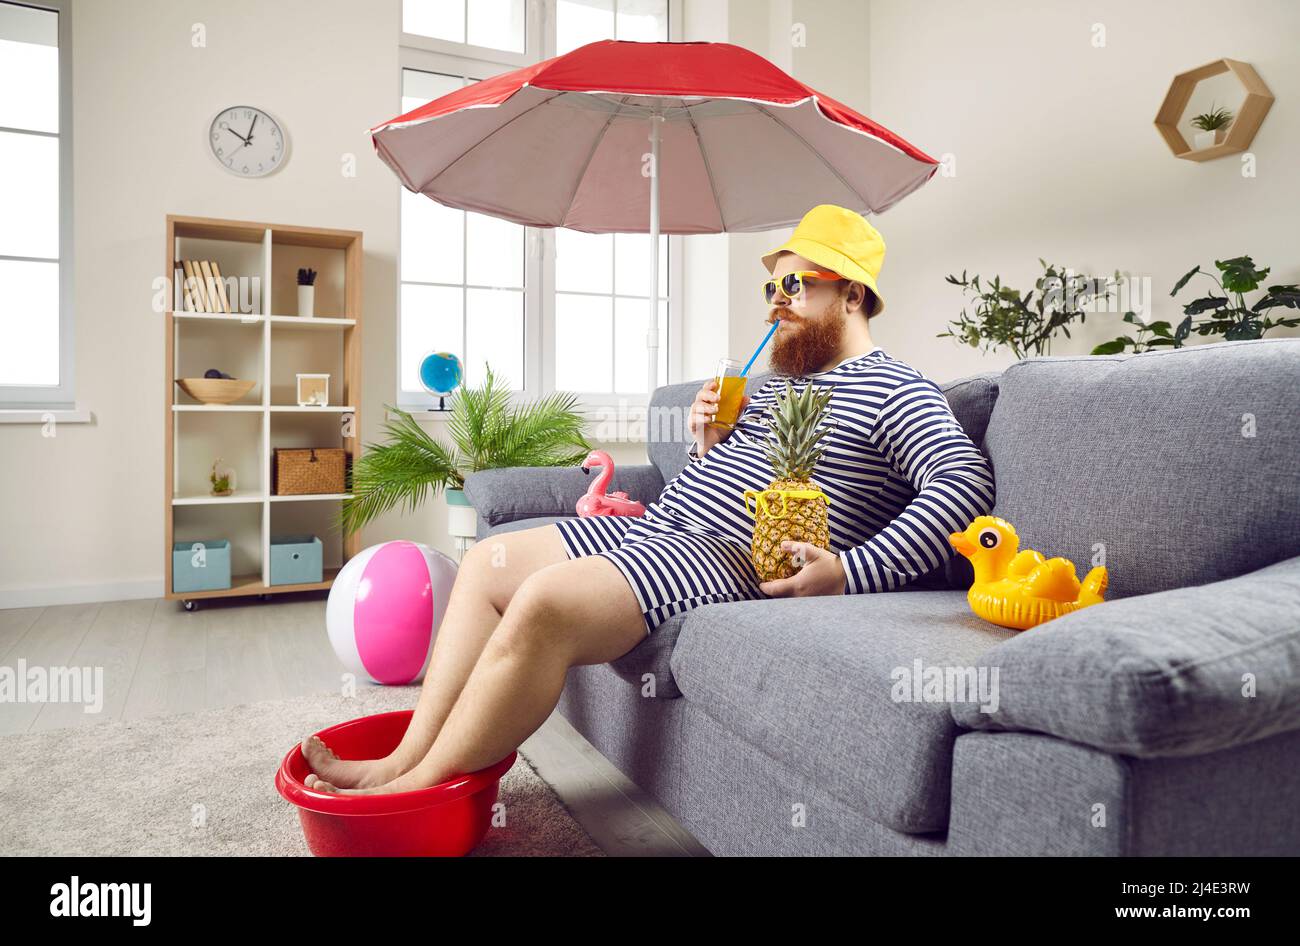 Funny man in living room at home imagines that he is resting on sea and sunbathing on beach. Stock Photo